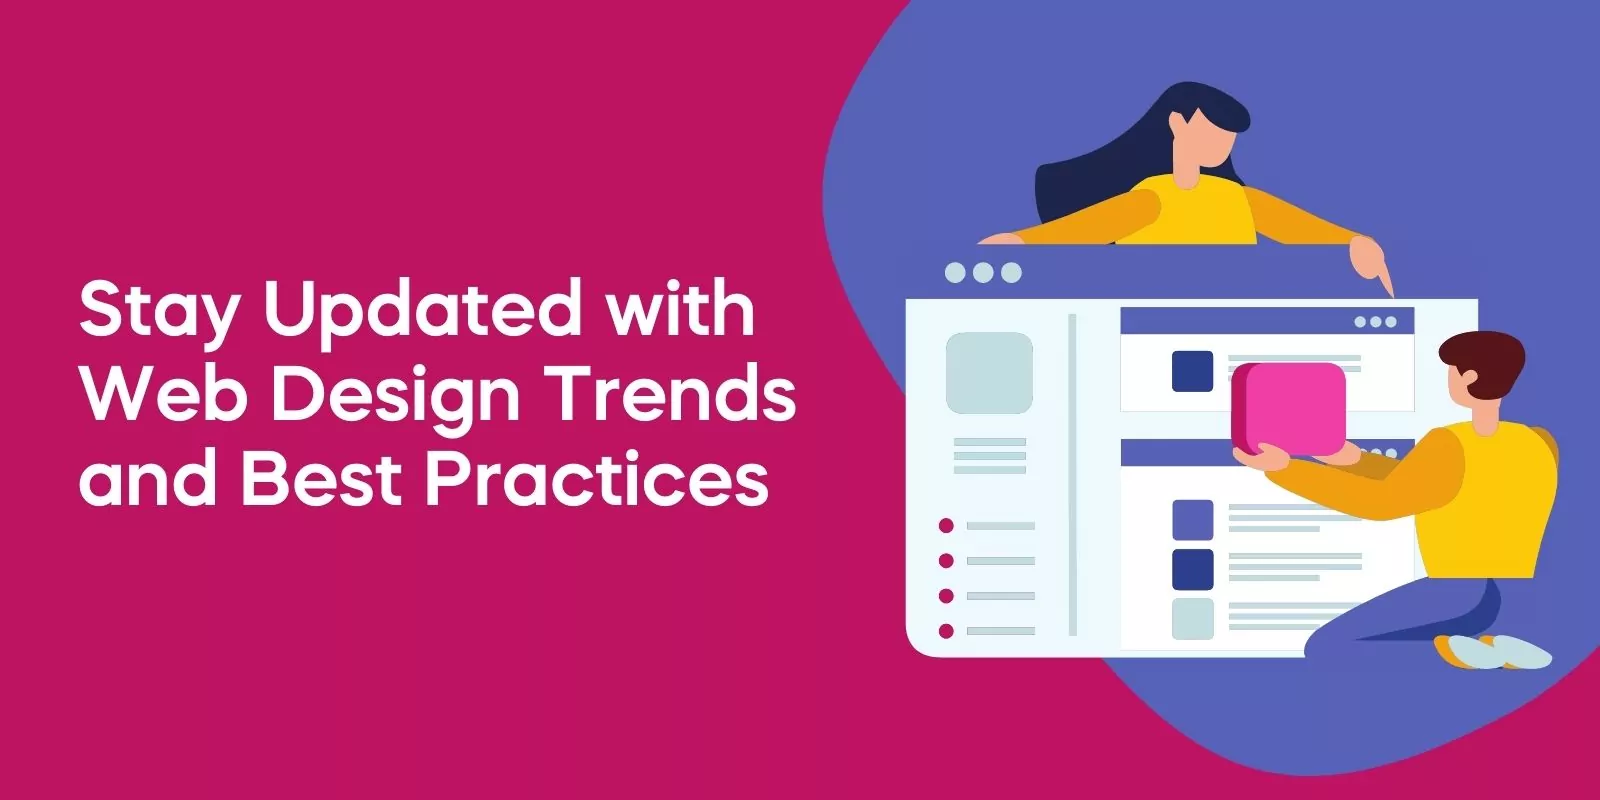 Stay Updated with Web Design Trends and Best Practices